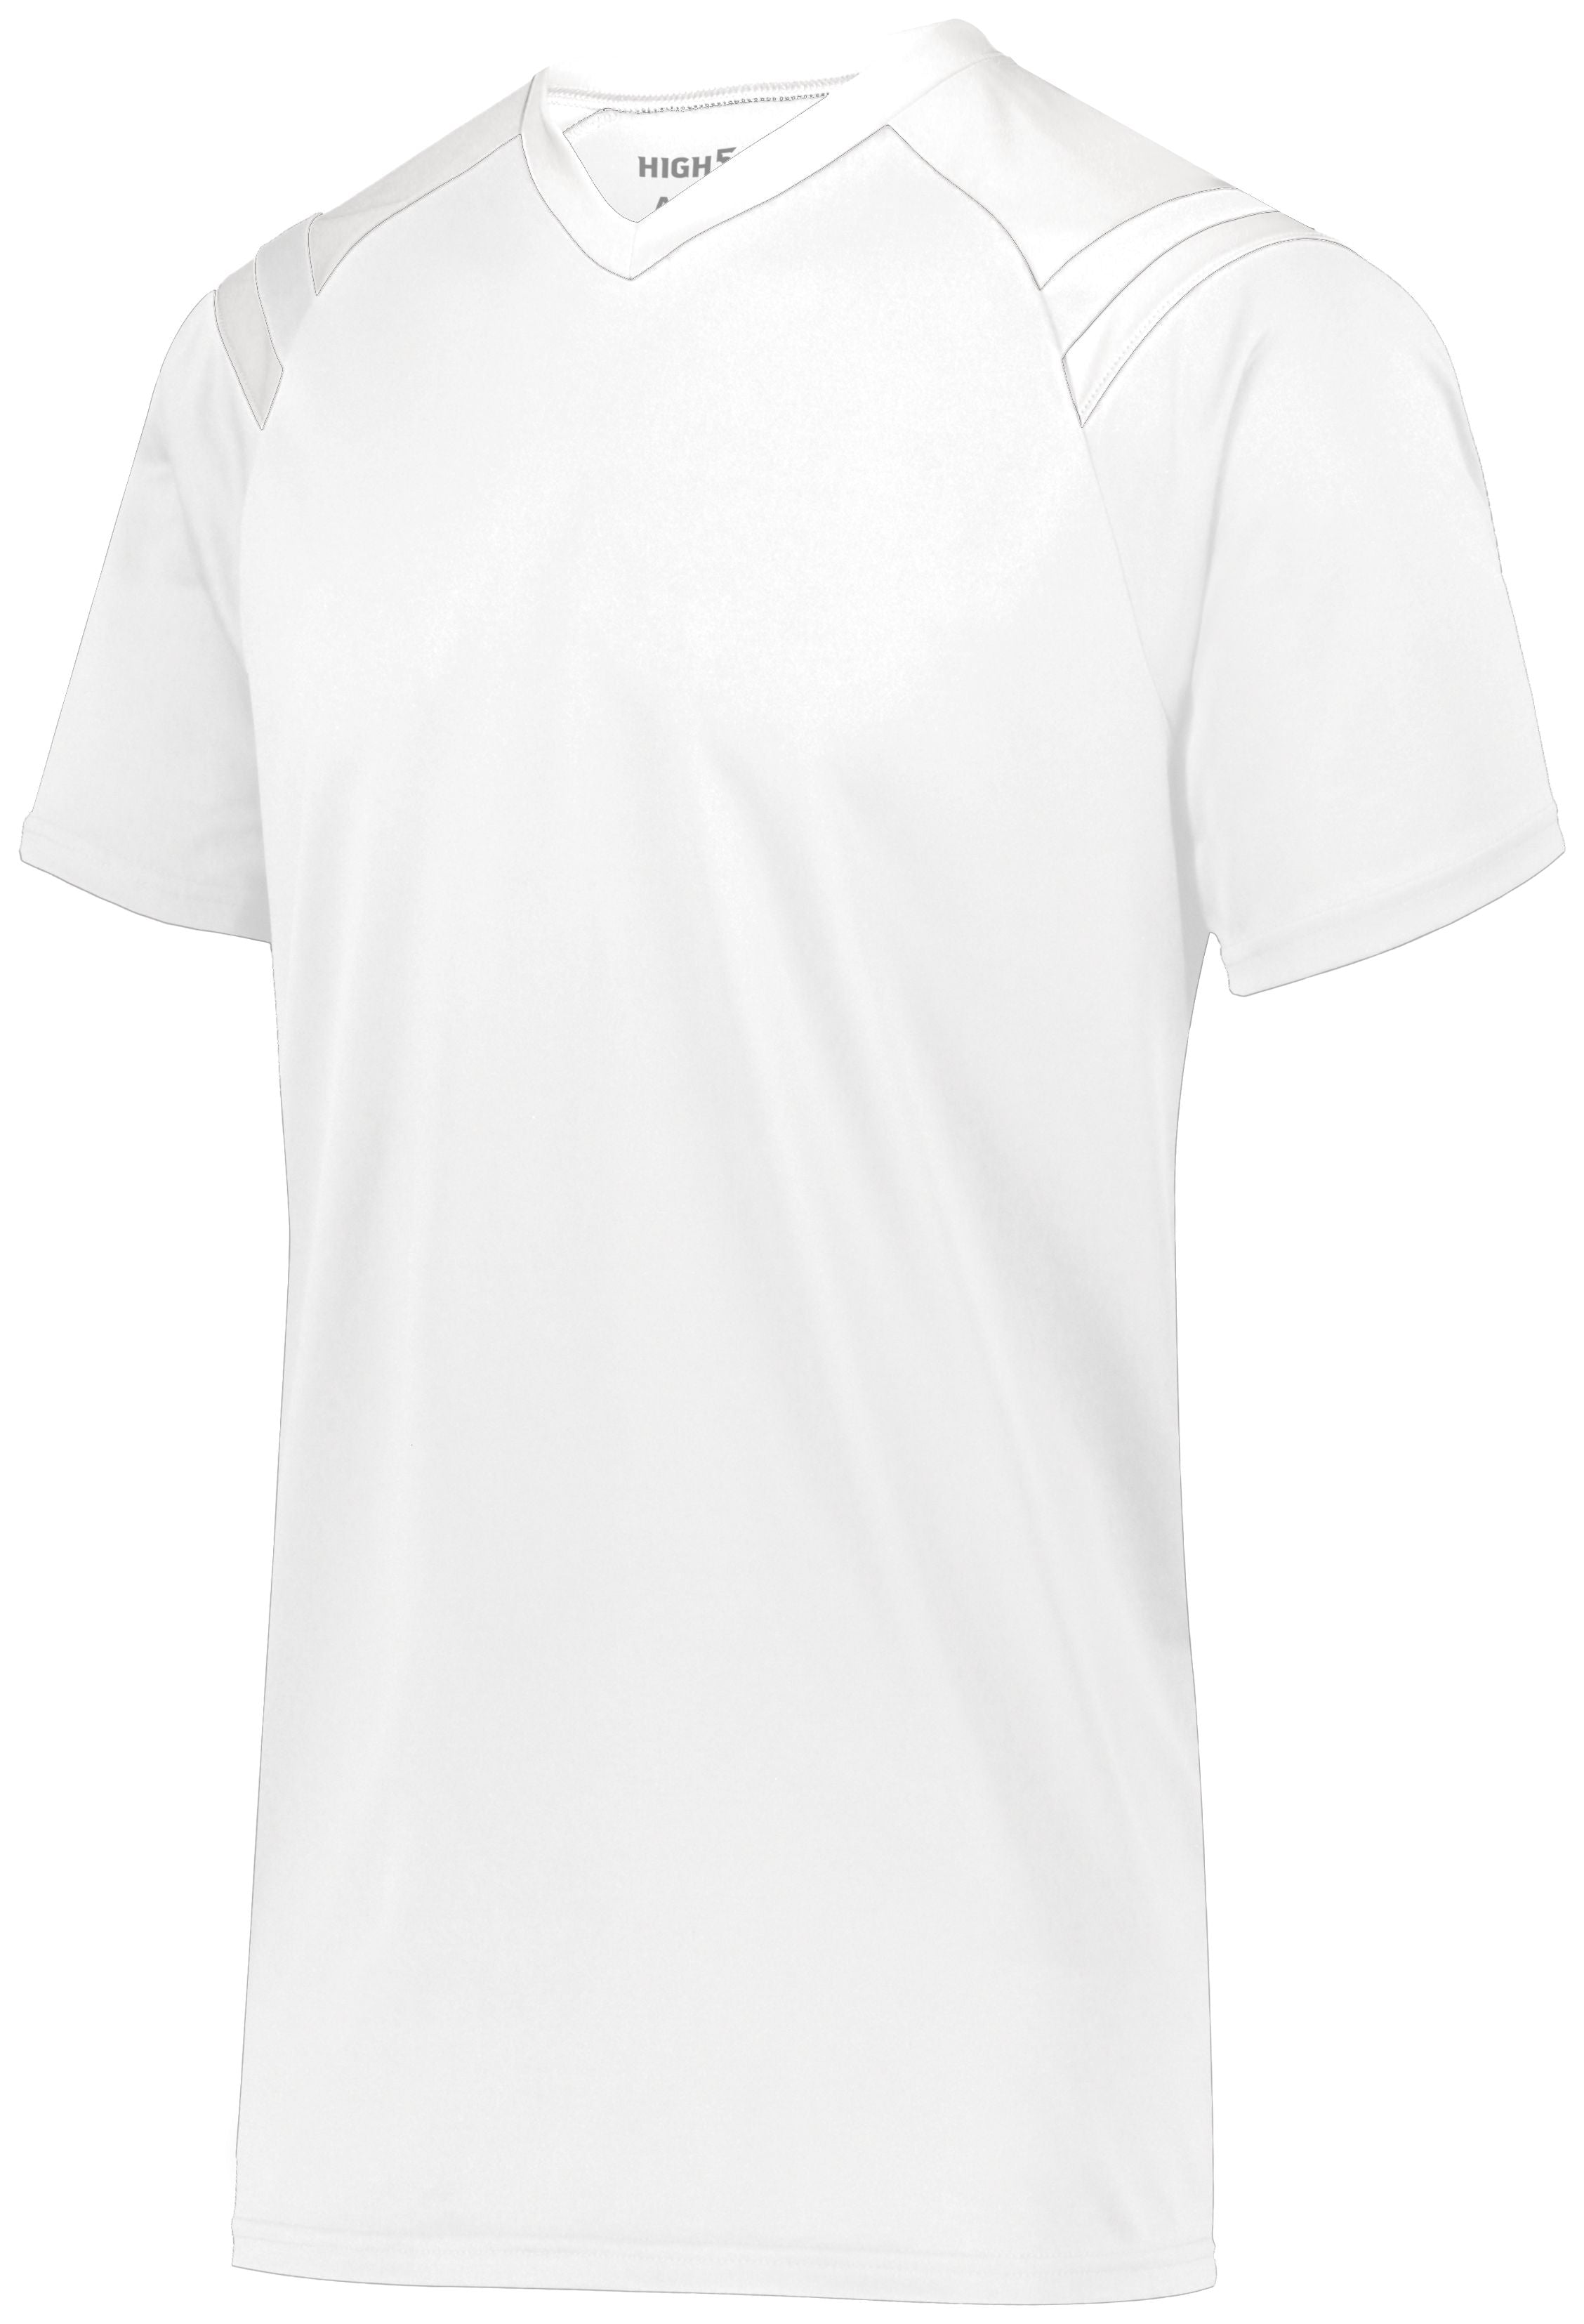 High 5 Youth Sheffield Jersey in White  -Part of the Youth, Youth-Jersey, High5-Products, Soccer, Shirts, All-Sports-1, Sheffield-Soccer-Jerseys product lines at KanaleyCreations.com